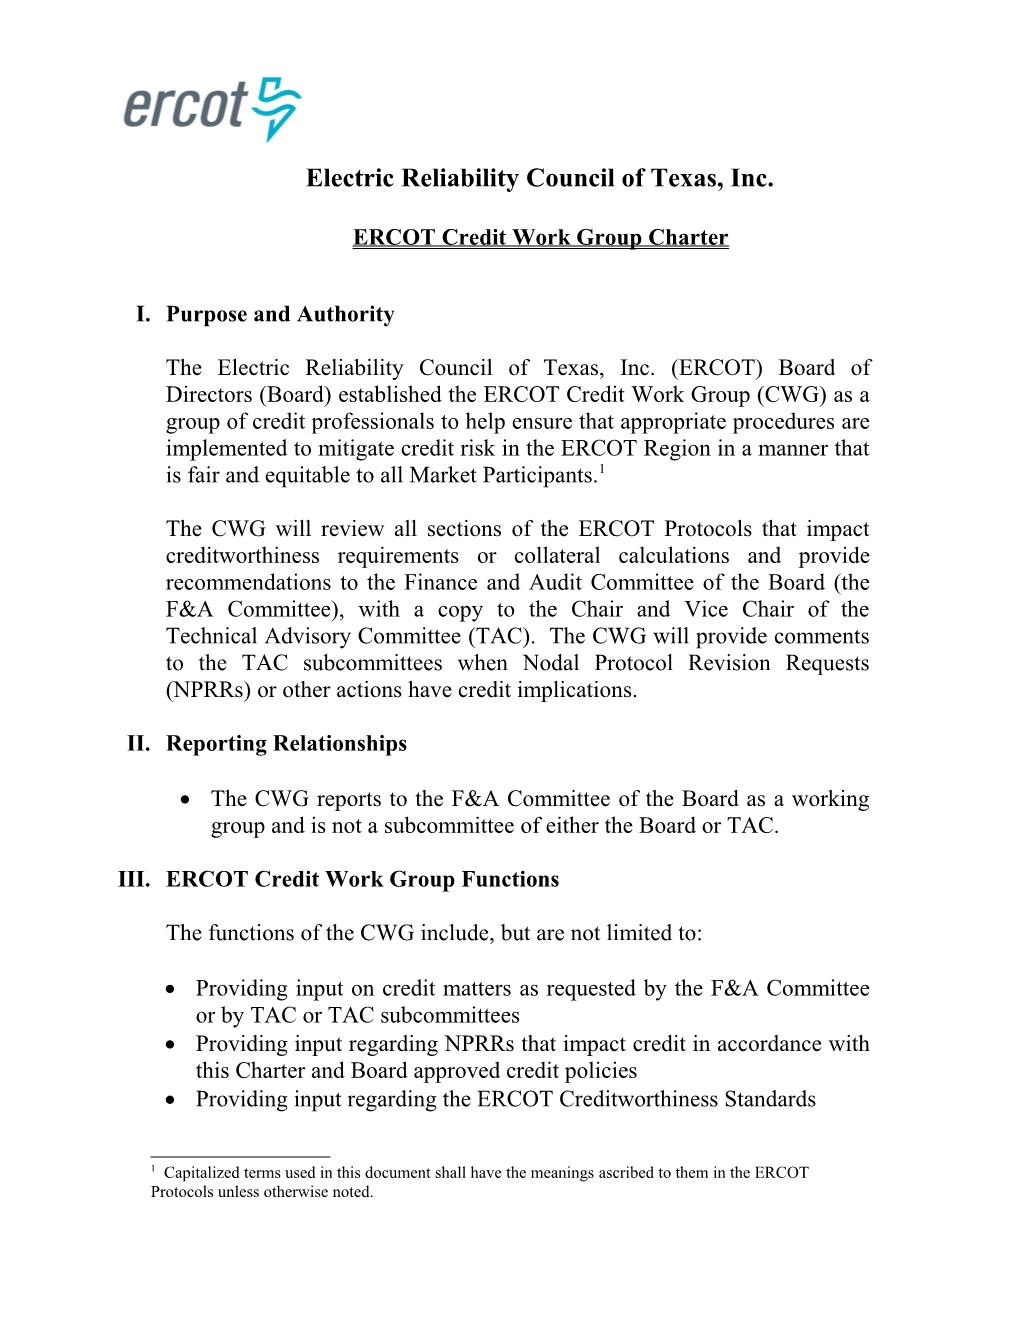 The Energy Reliability Council of Texas